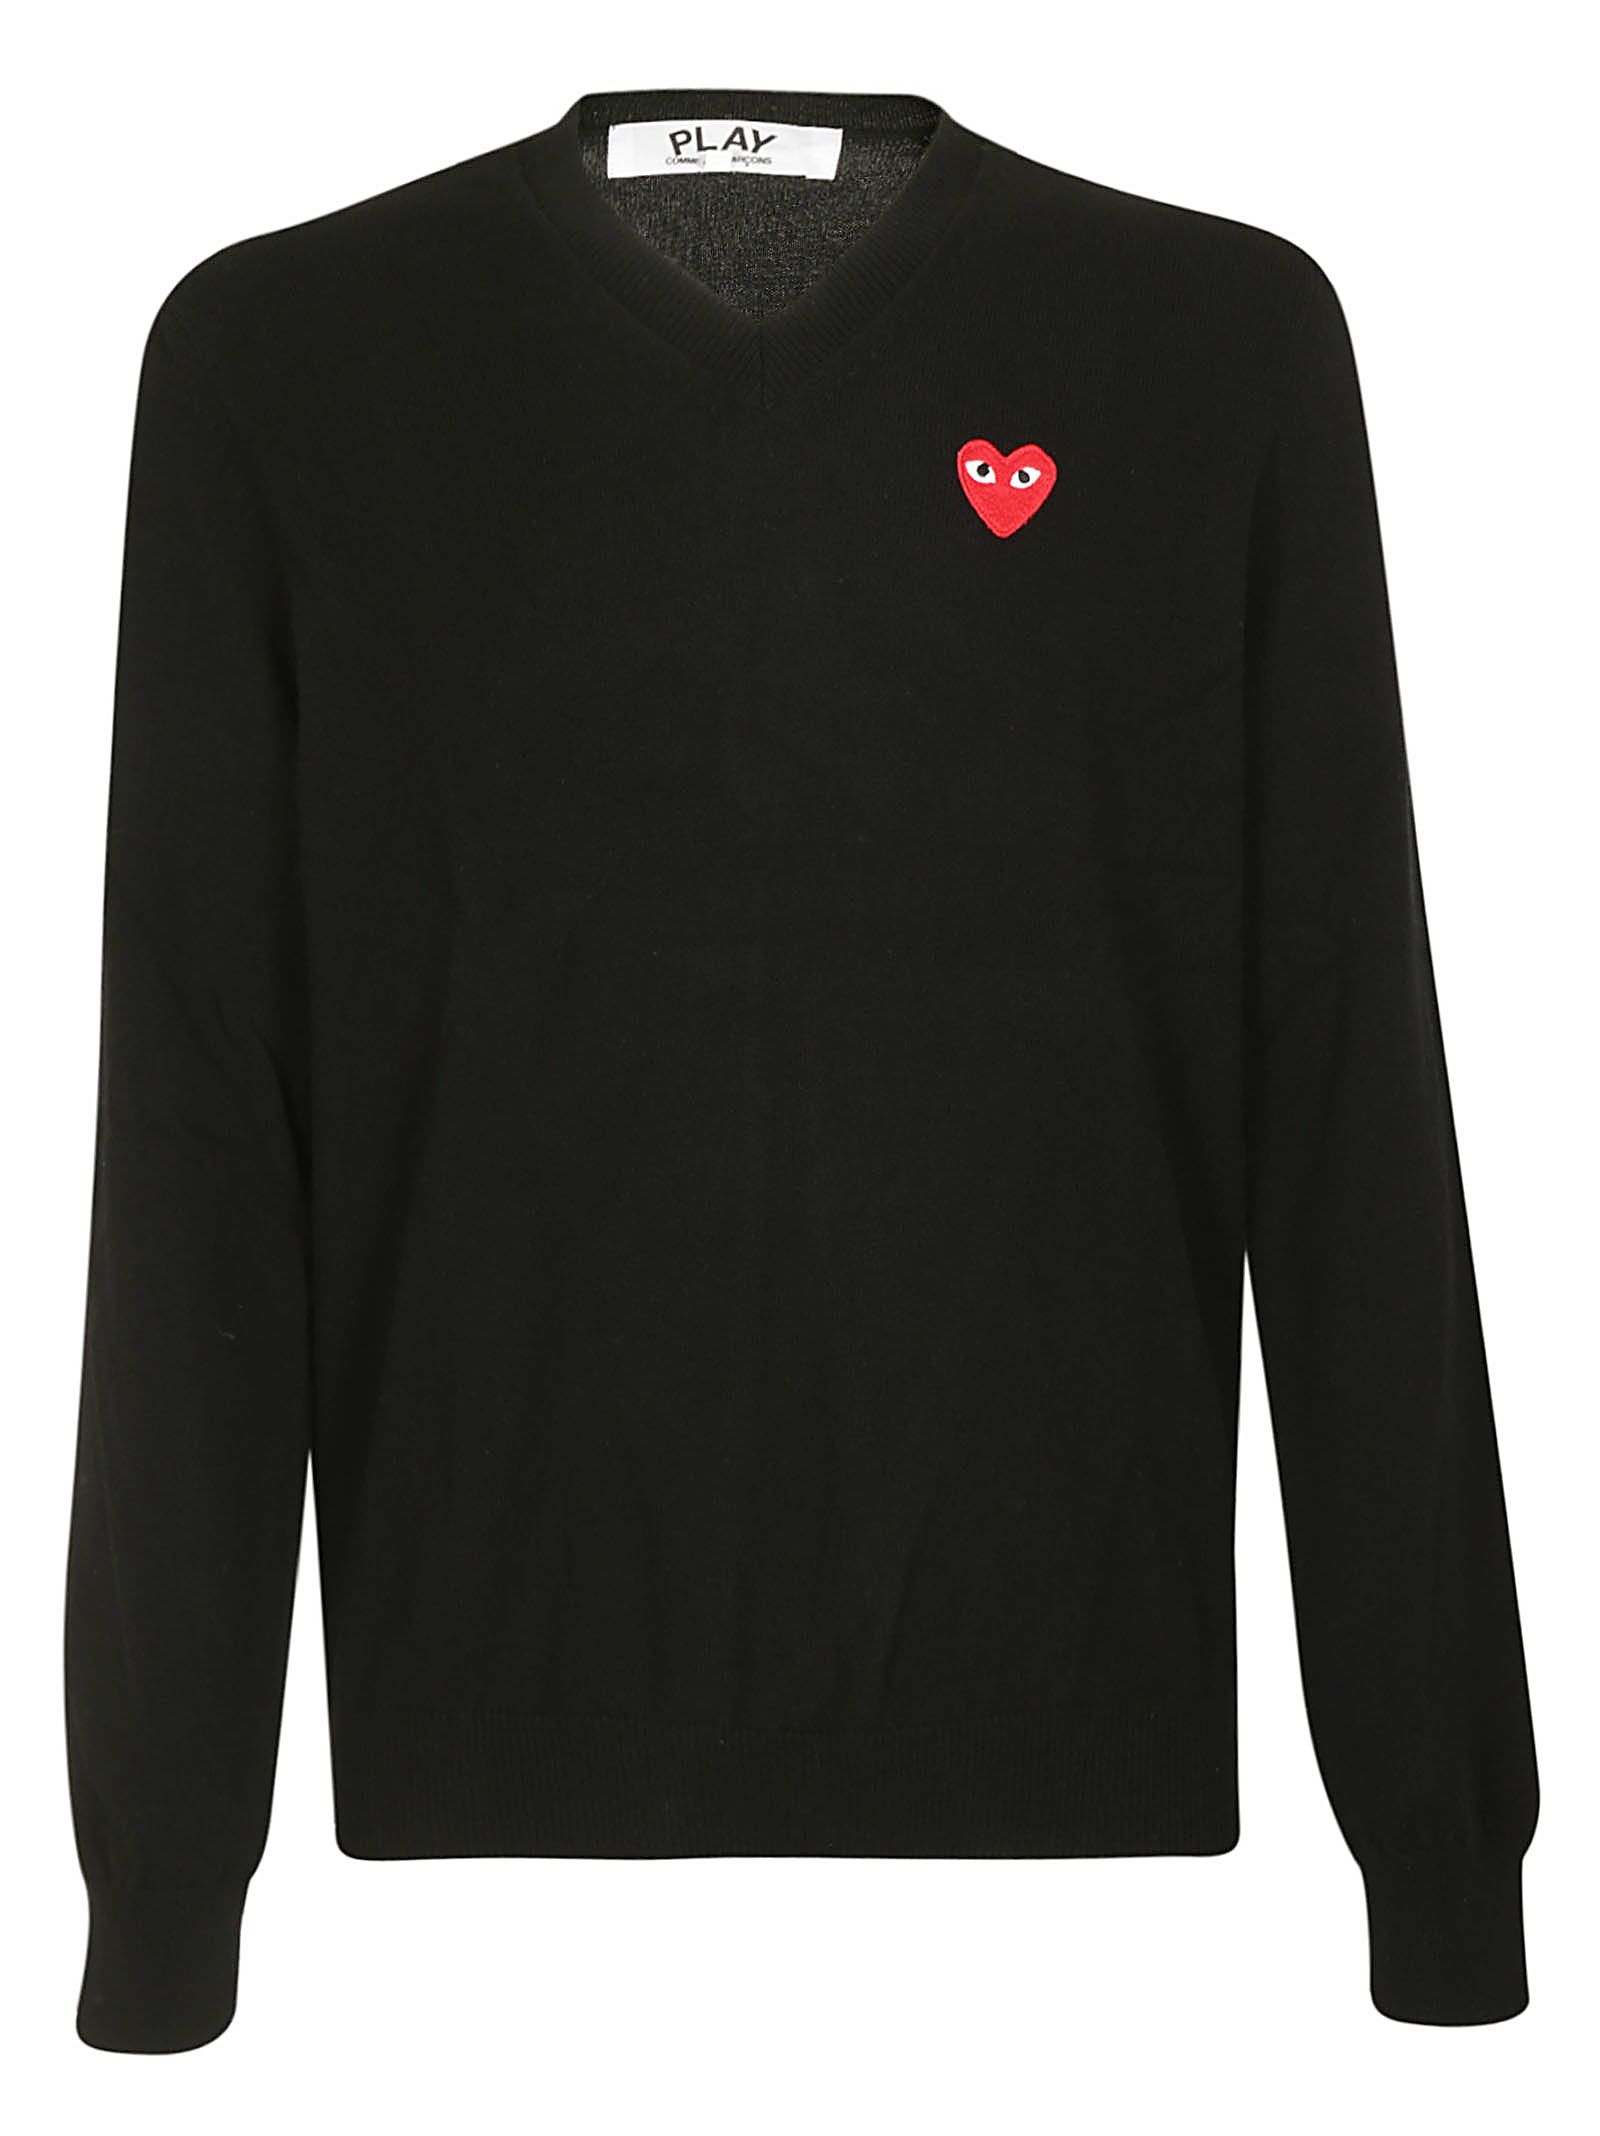 italist | Best price in the market for Comme des Garçons Play Play ...